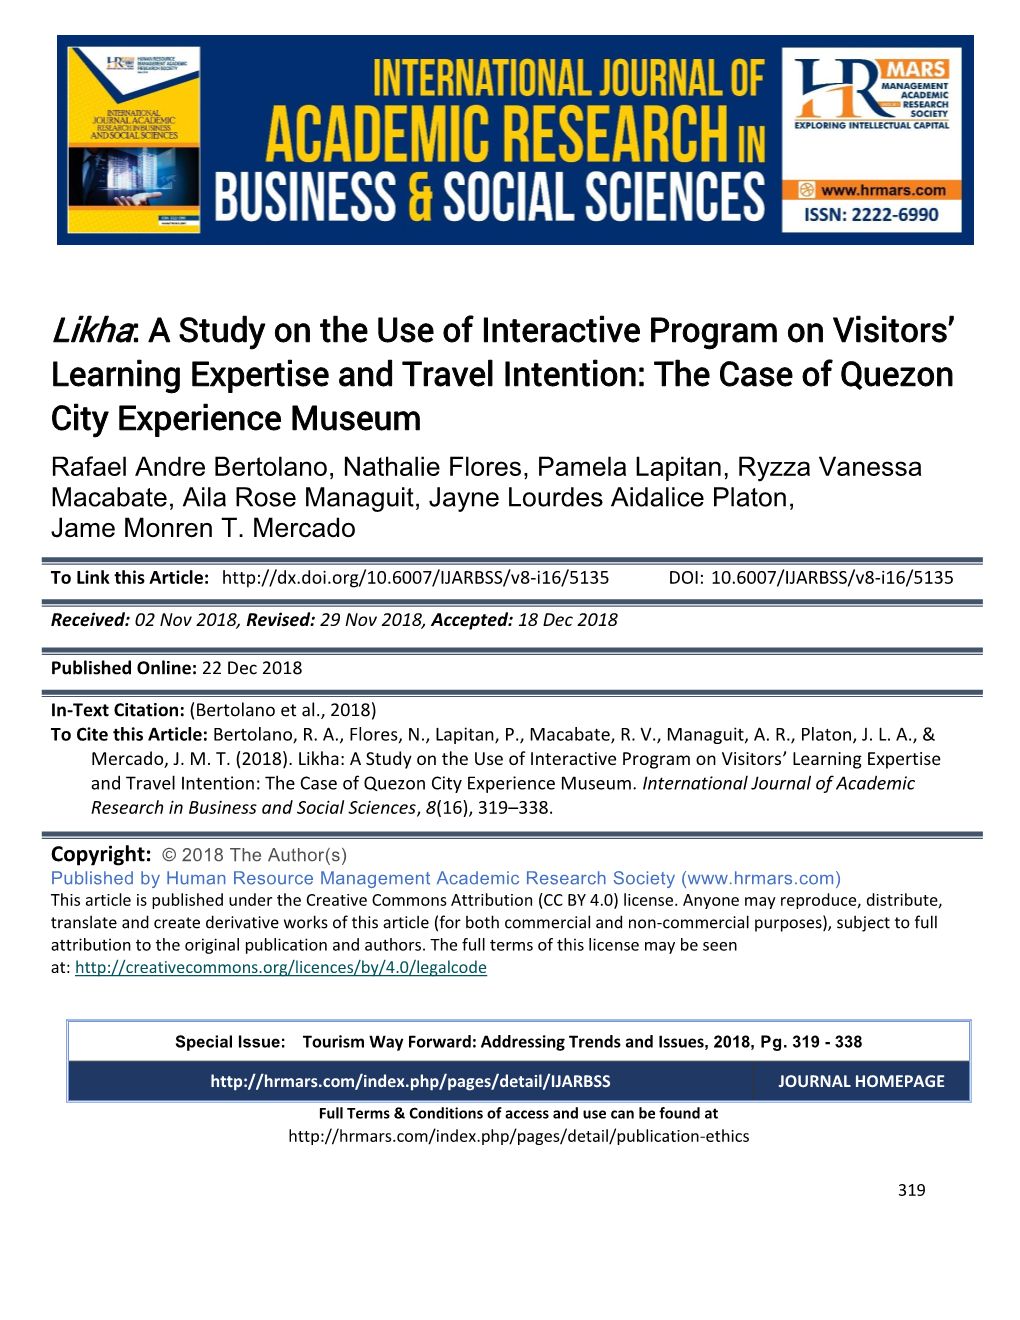 A Study on the Use of Interactive Program on Visitors’ Learning Expertise and Travel Intention: the Case of Quezon City Experience Museum